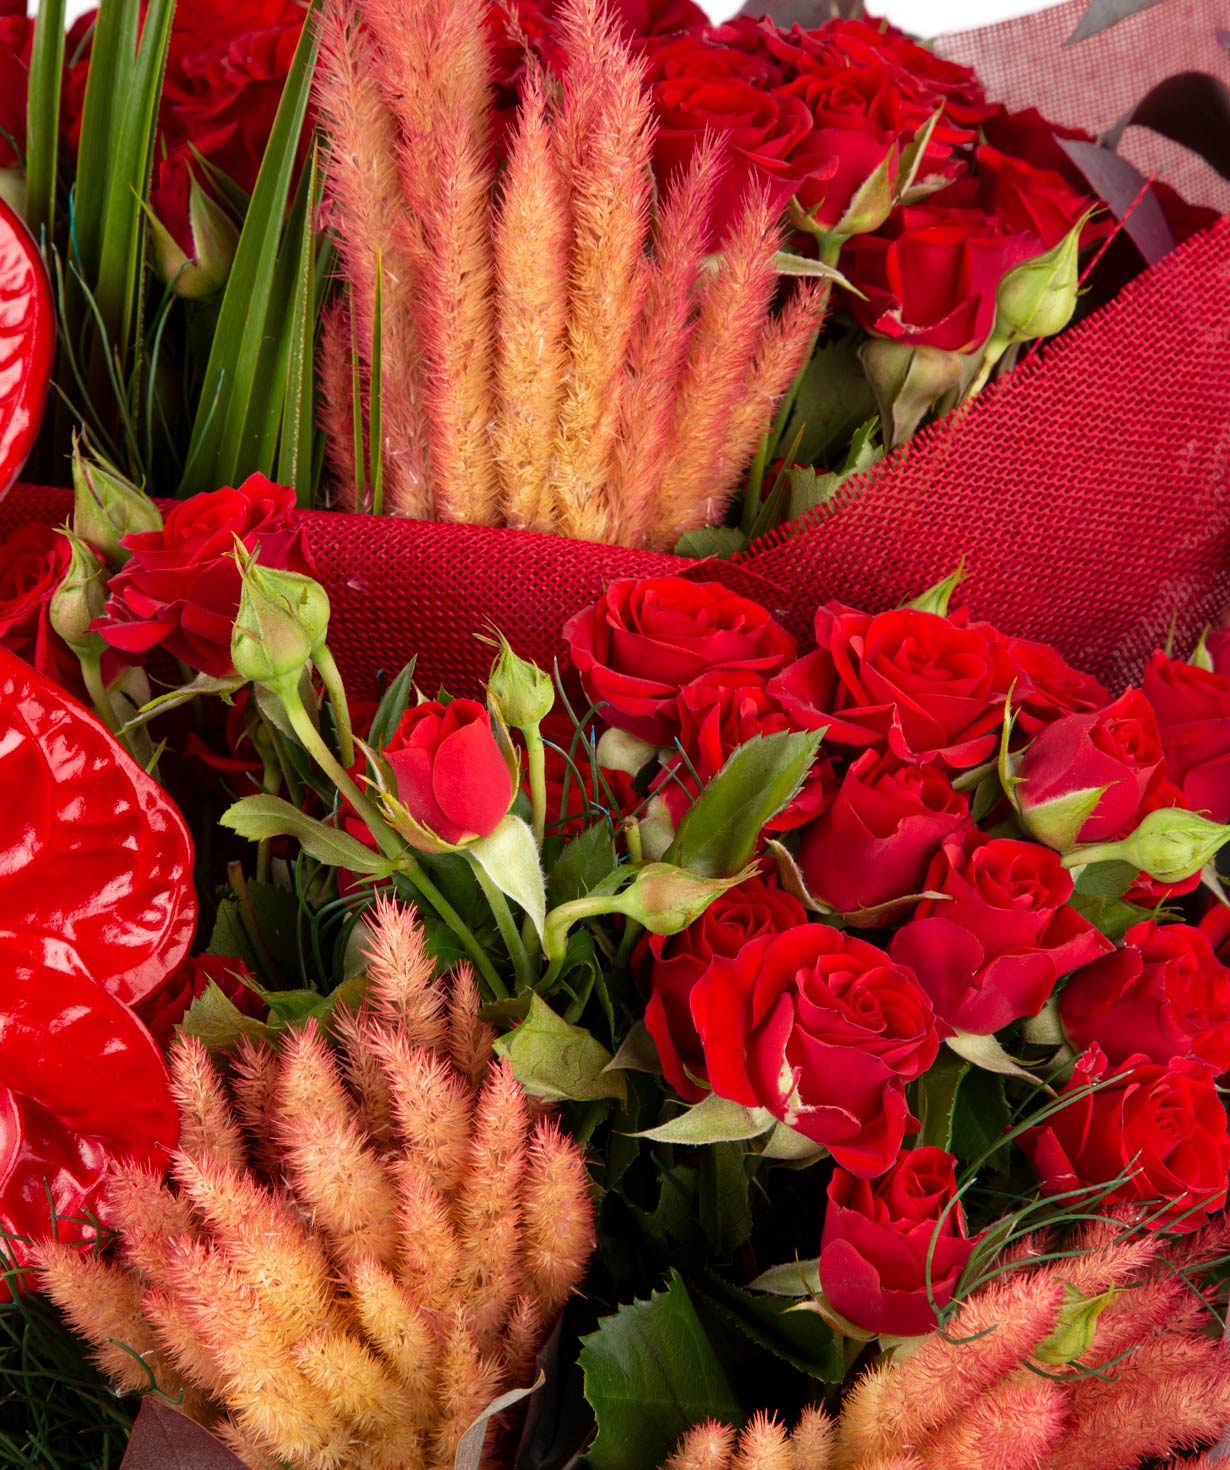 Bouquet  `Stolin` of roses, anthurium, dried flowers